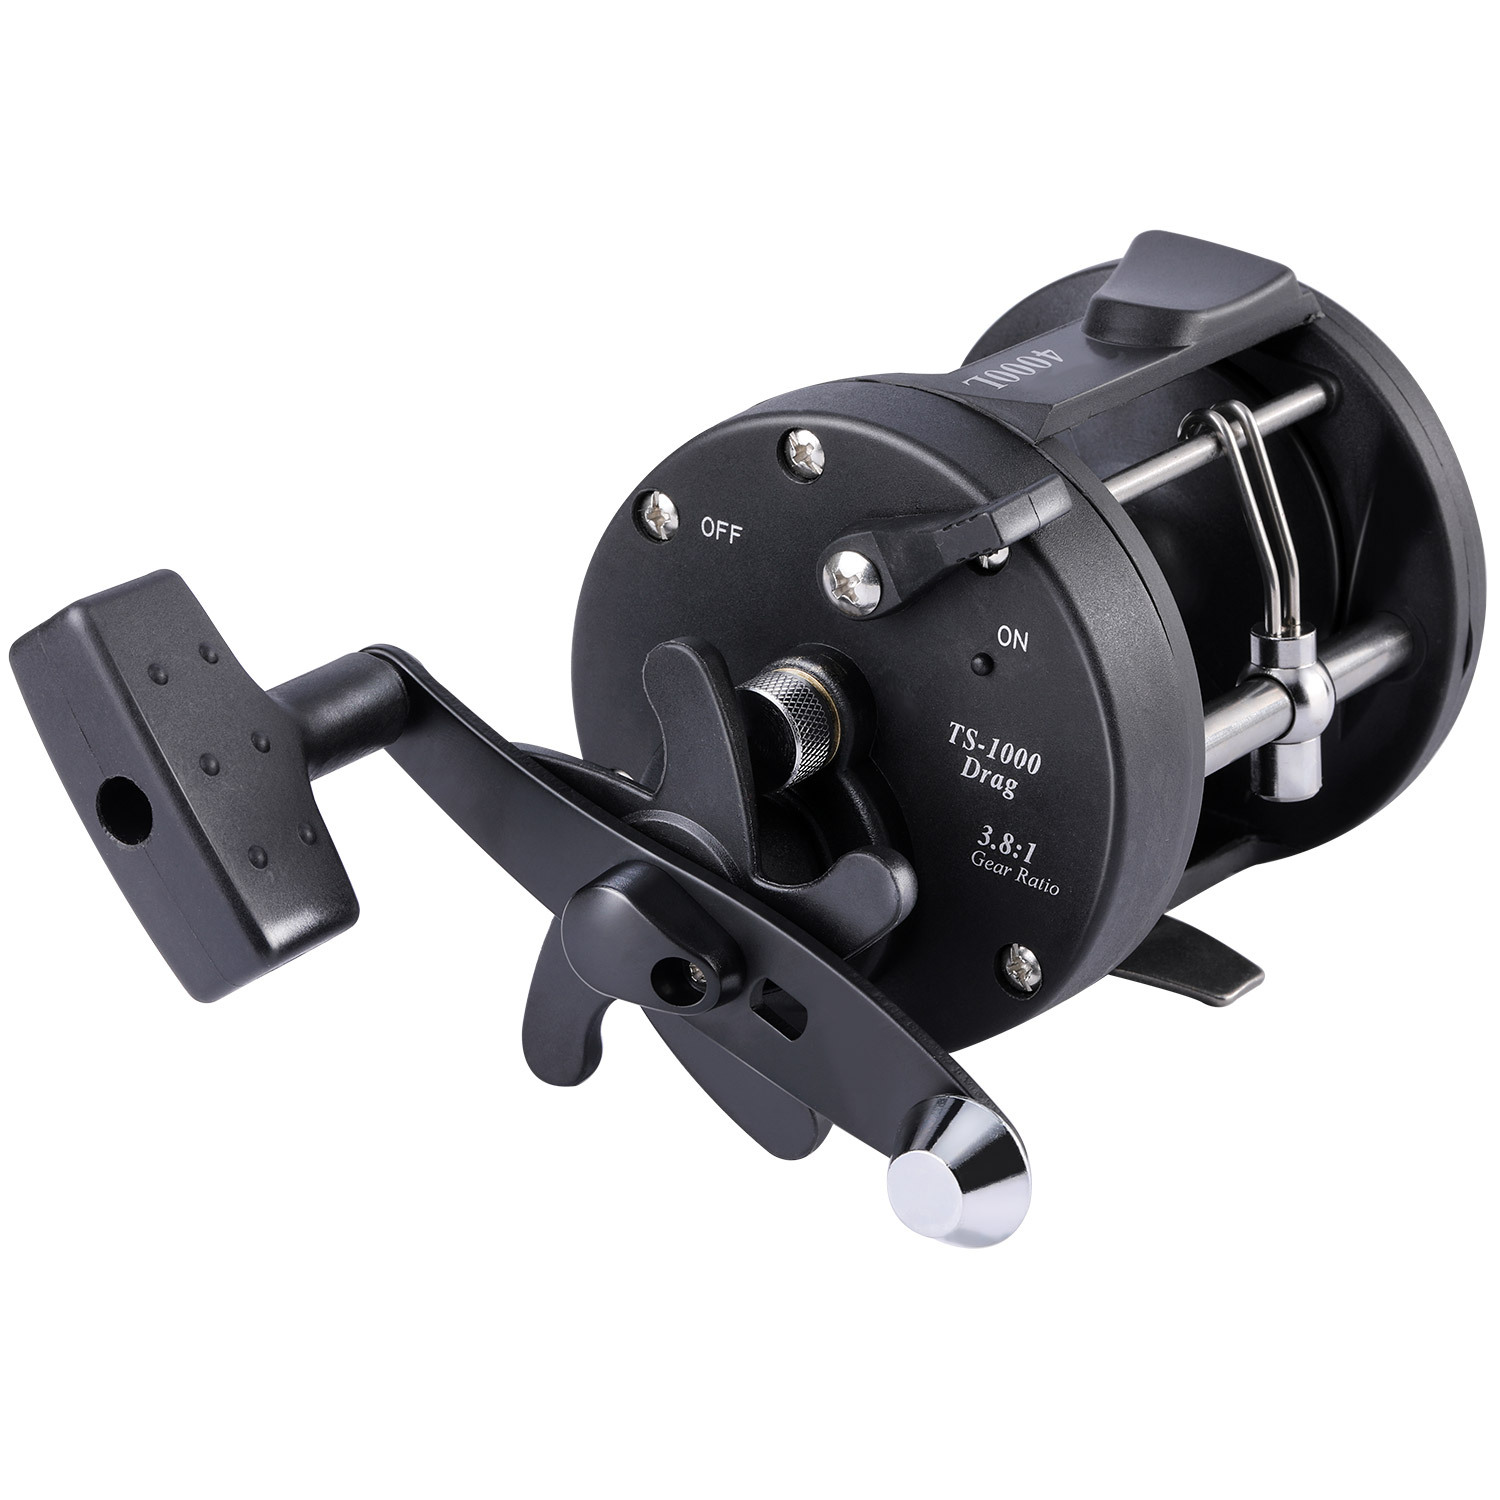 Tempo Persist Spinning Reel - Saltwater and Freshwater Fishing